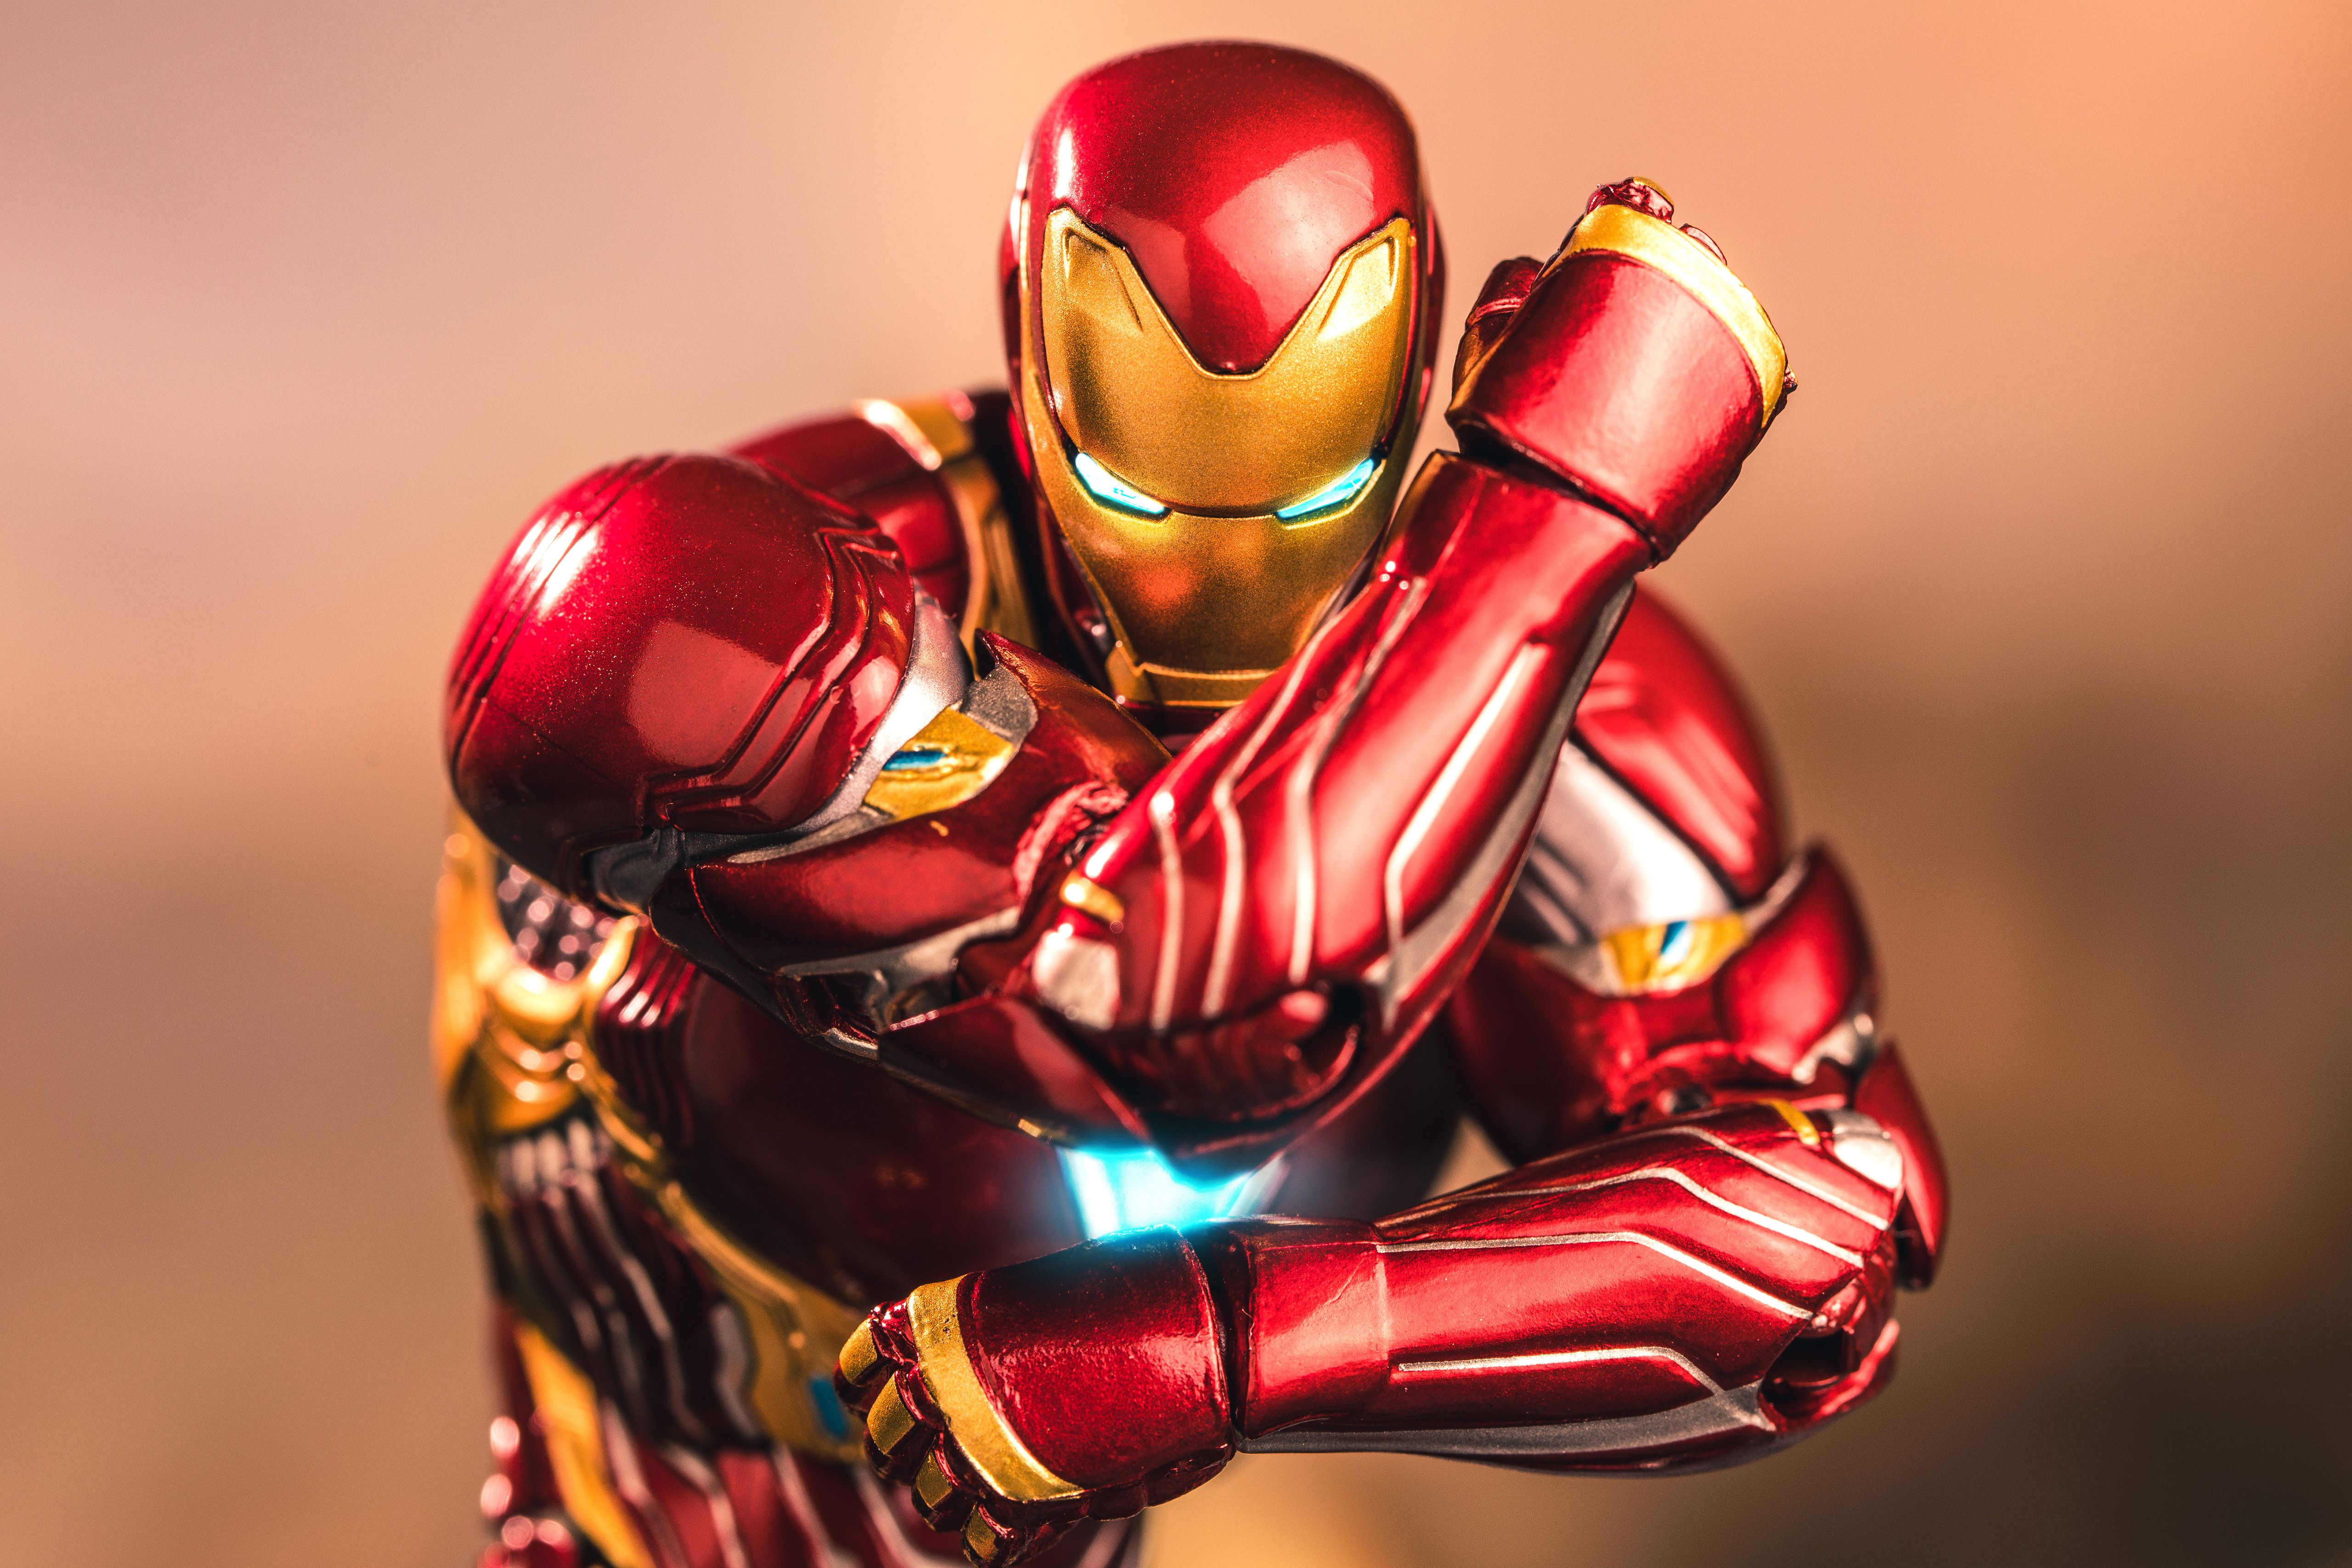 Wallpaper Iron Man, Marvel Superhero, Action figure, 5K, Photography / Editor's Picks,. Wallpaper for iPhone, Android, Mobile and Desktop